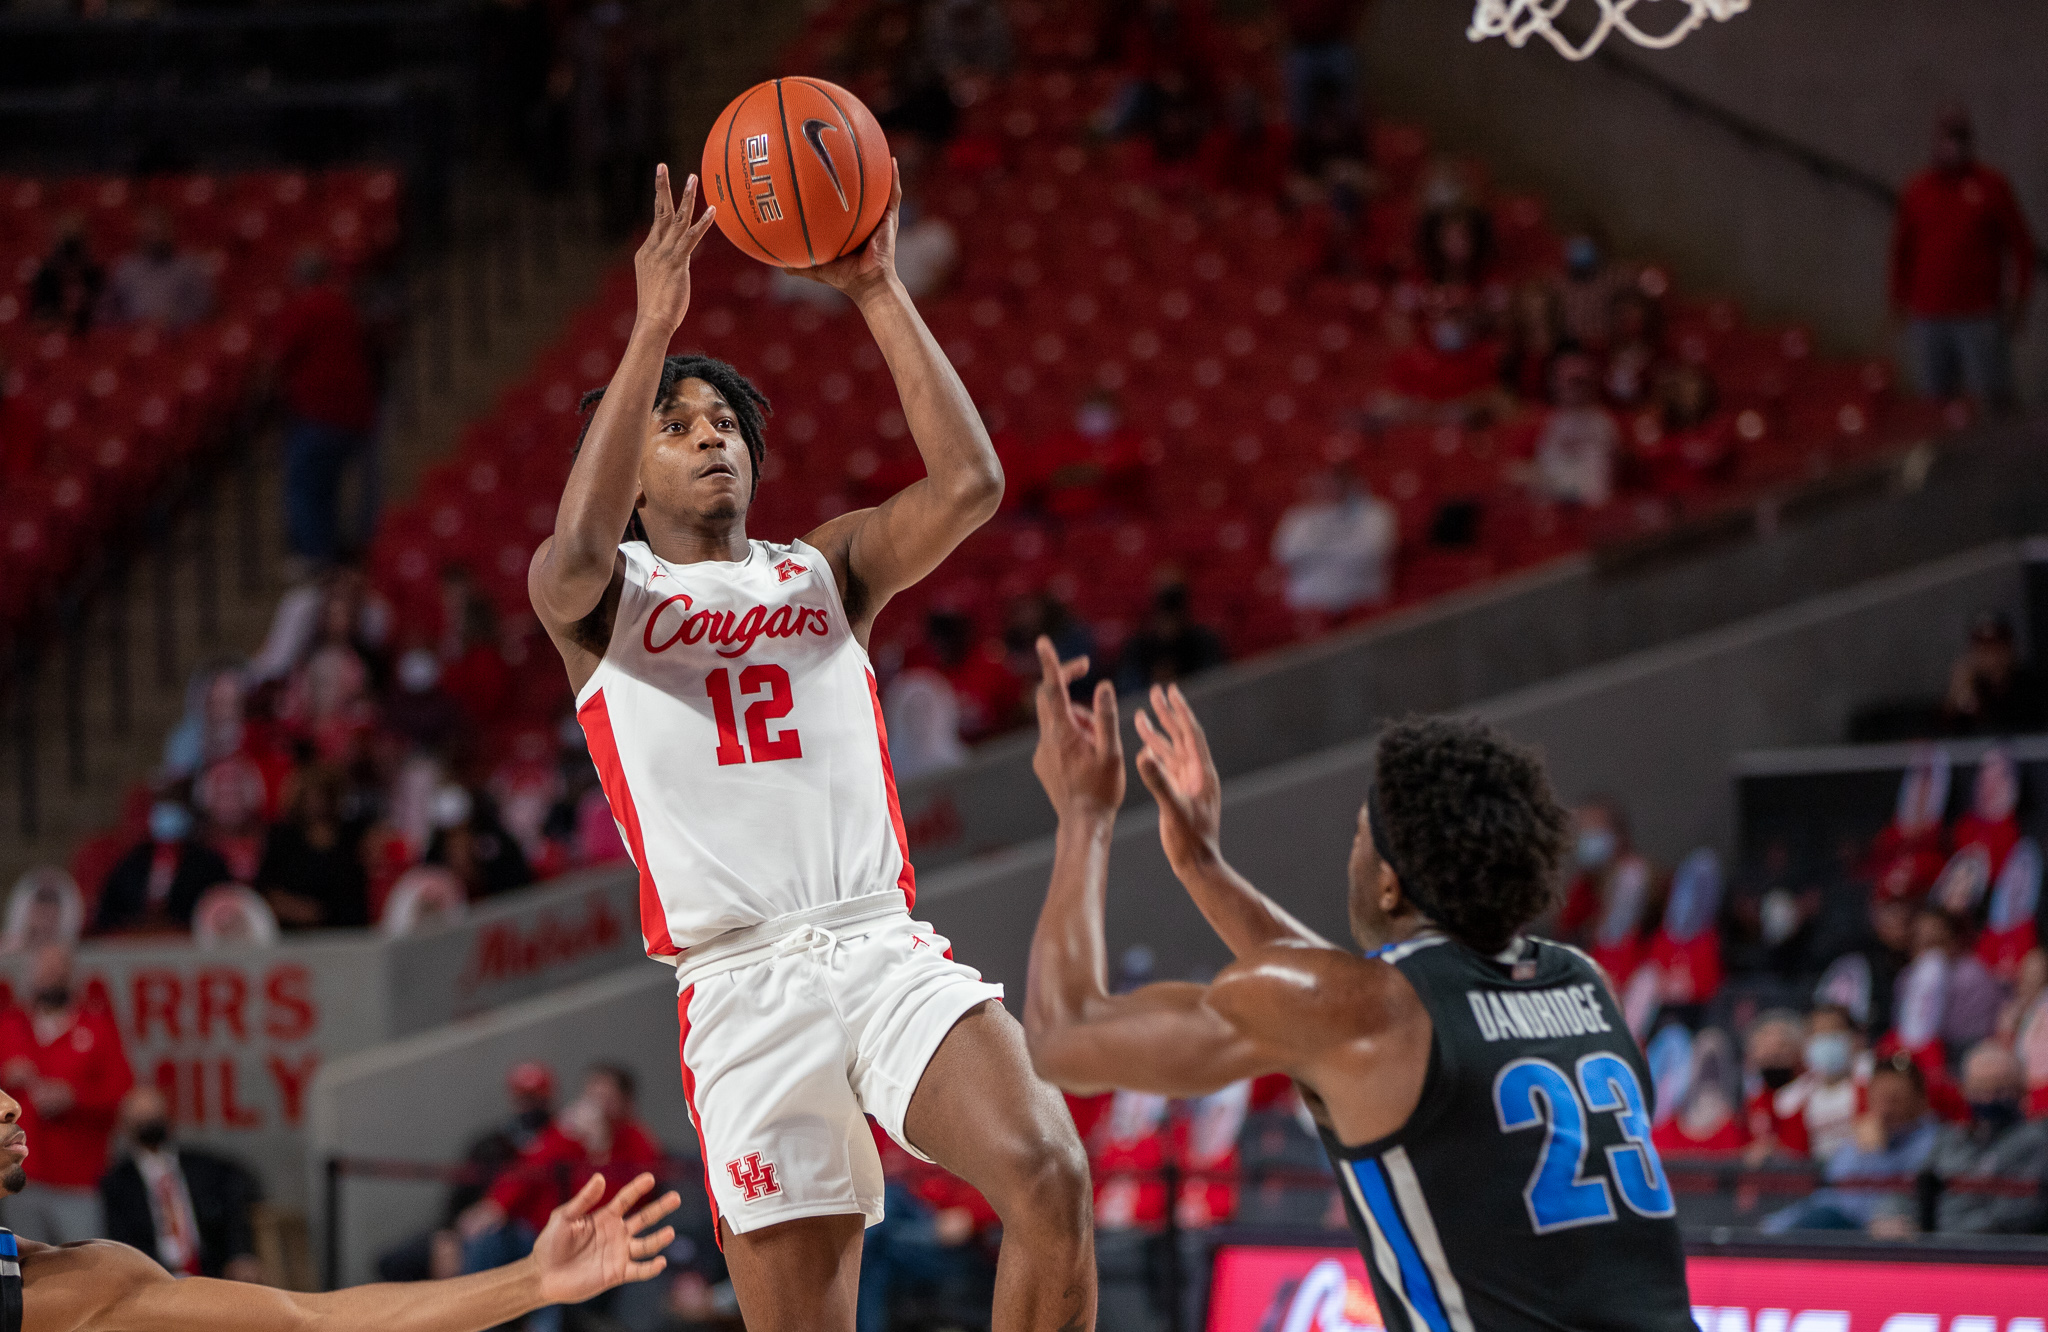 Sophomore guard Tramon Mark looks to be more of a playmaker and shot creator for the UH men's basketball team in the 2021-22 season. | Andy Yanez/The Cougar